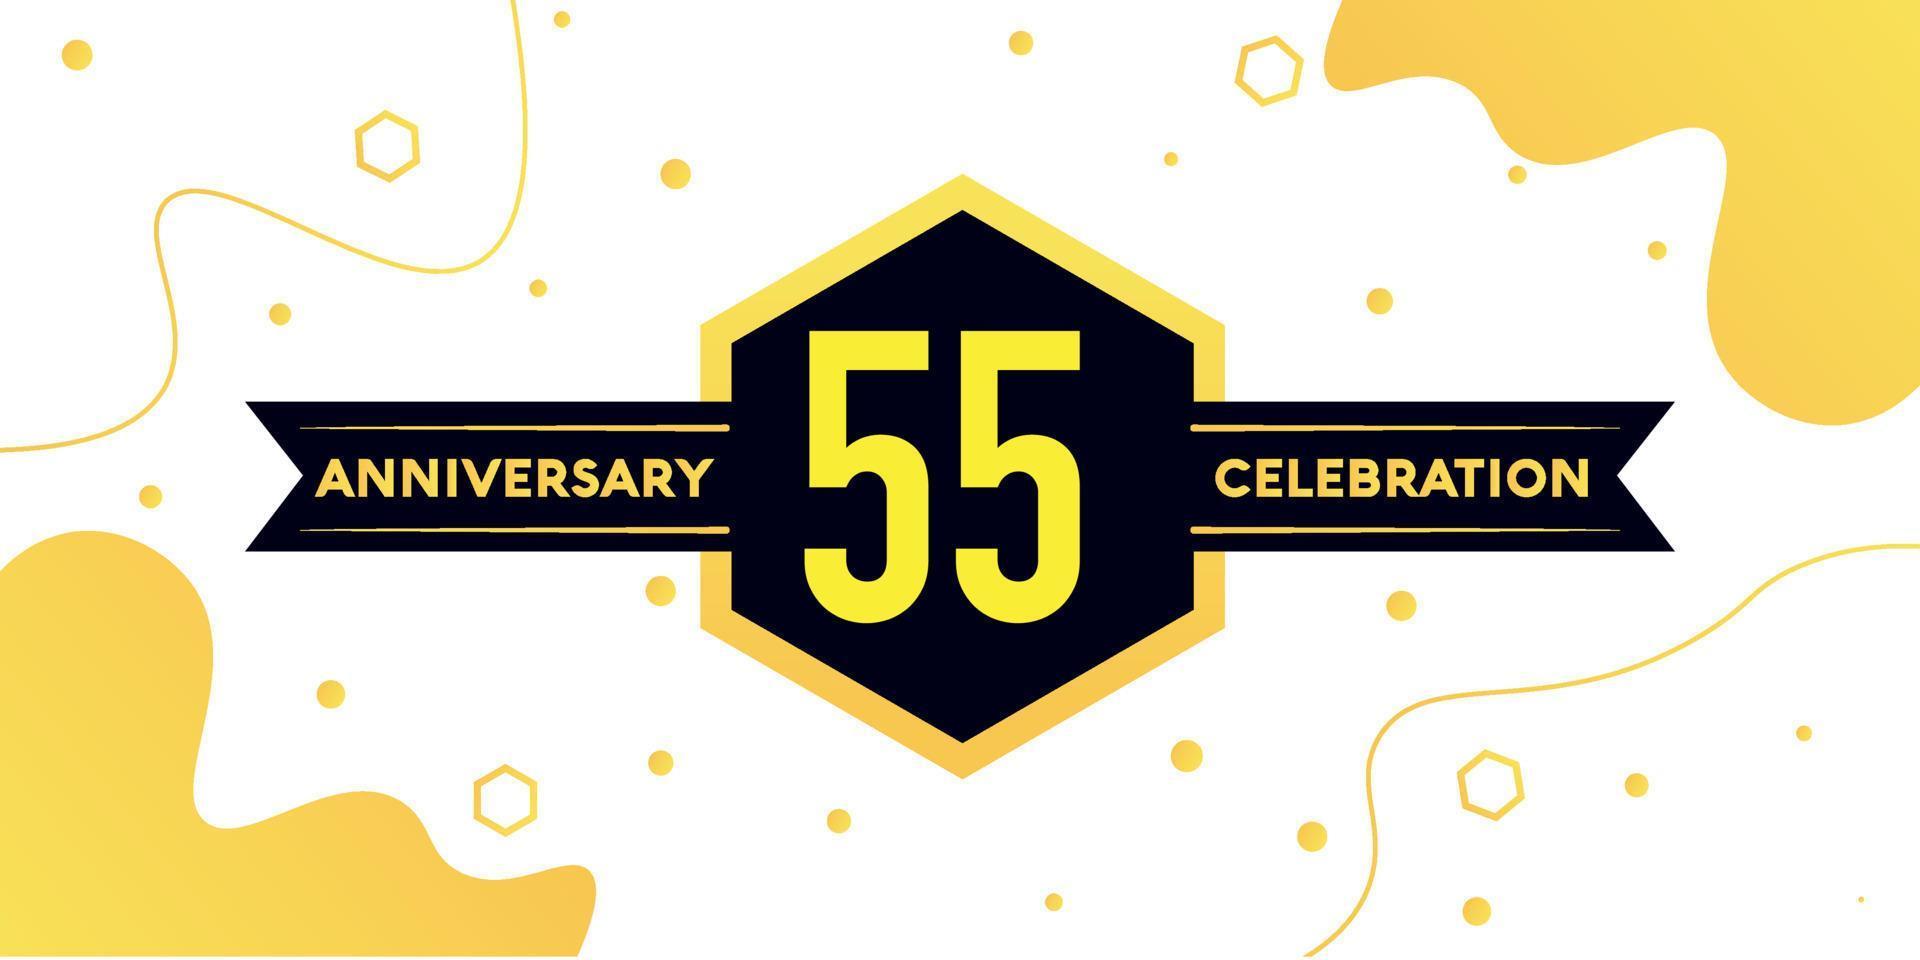 55 years anniversary logo vector design with yellow geometric shape with black and abstract design on white background template